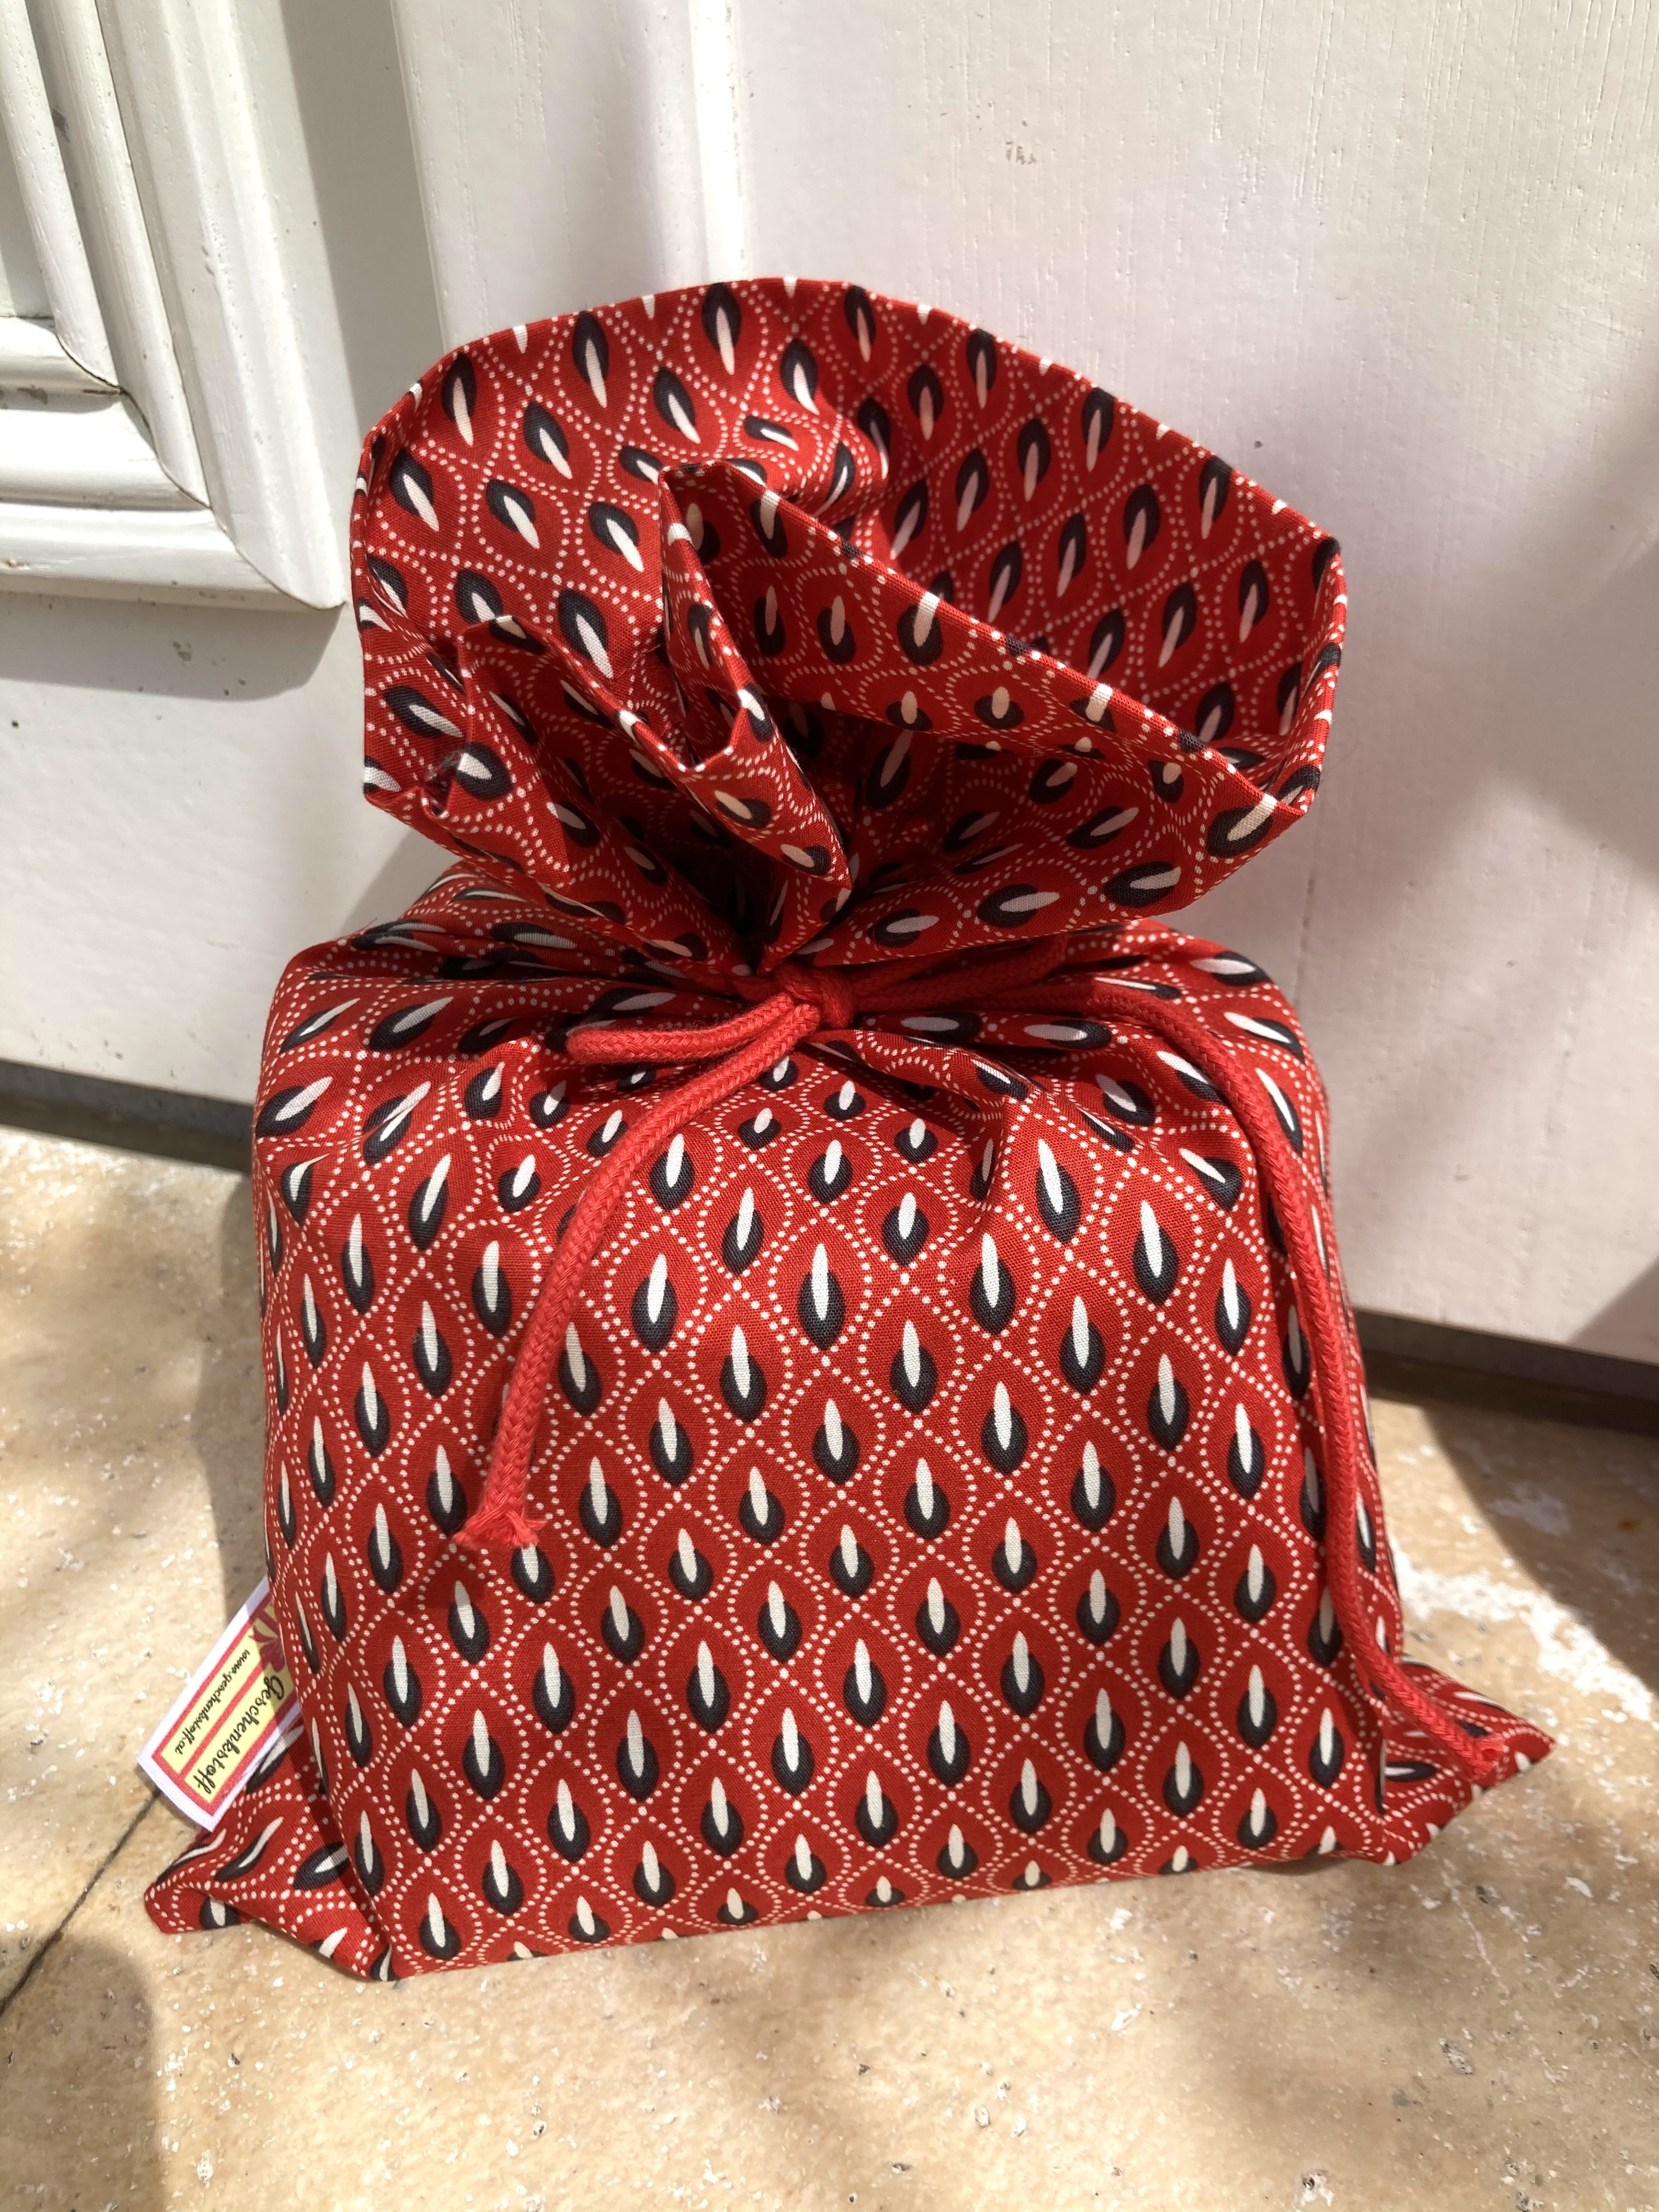 Everything Simple: Red Drop Gift Cloth Bag